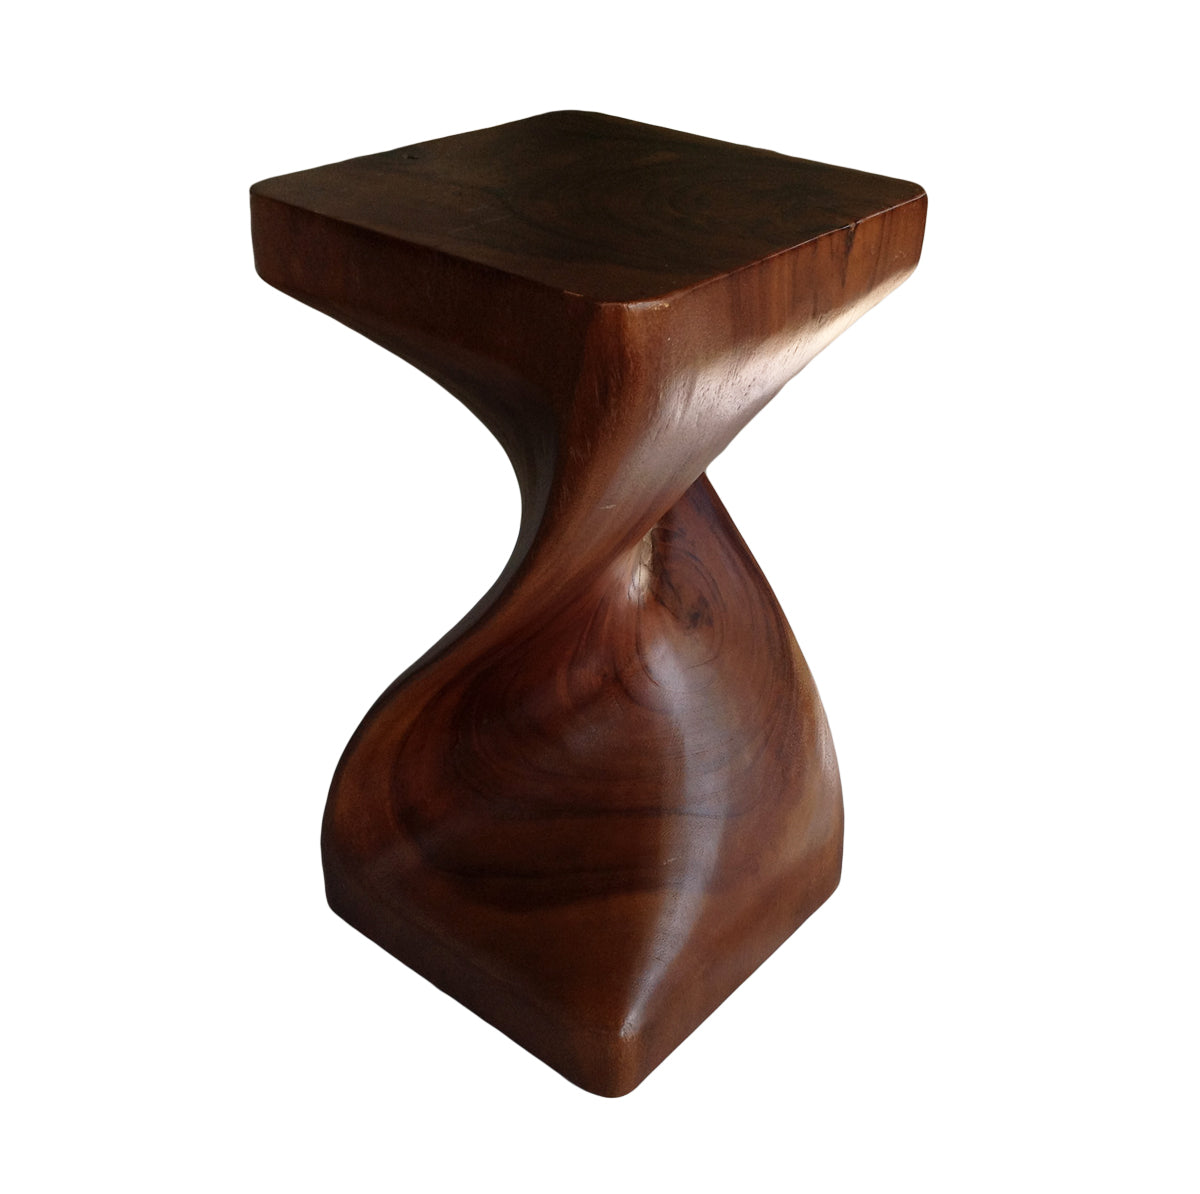 Wood Side Table - Square Top Stool - Single Twist 20 inch - Caramel Brown